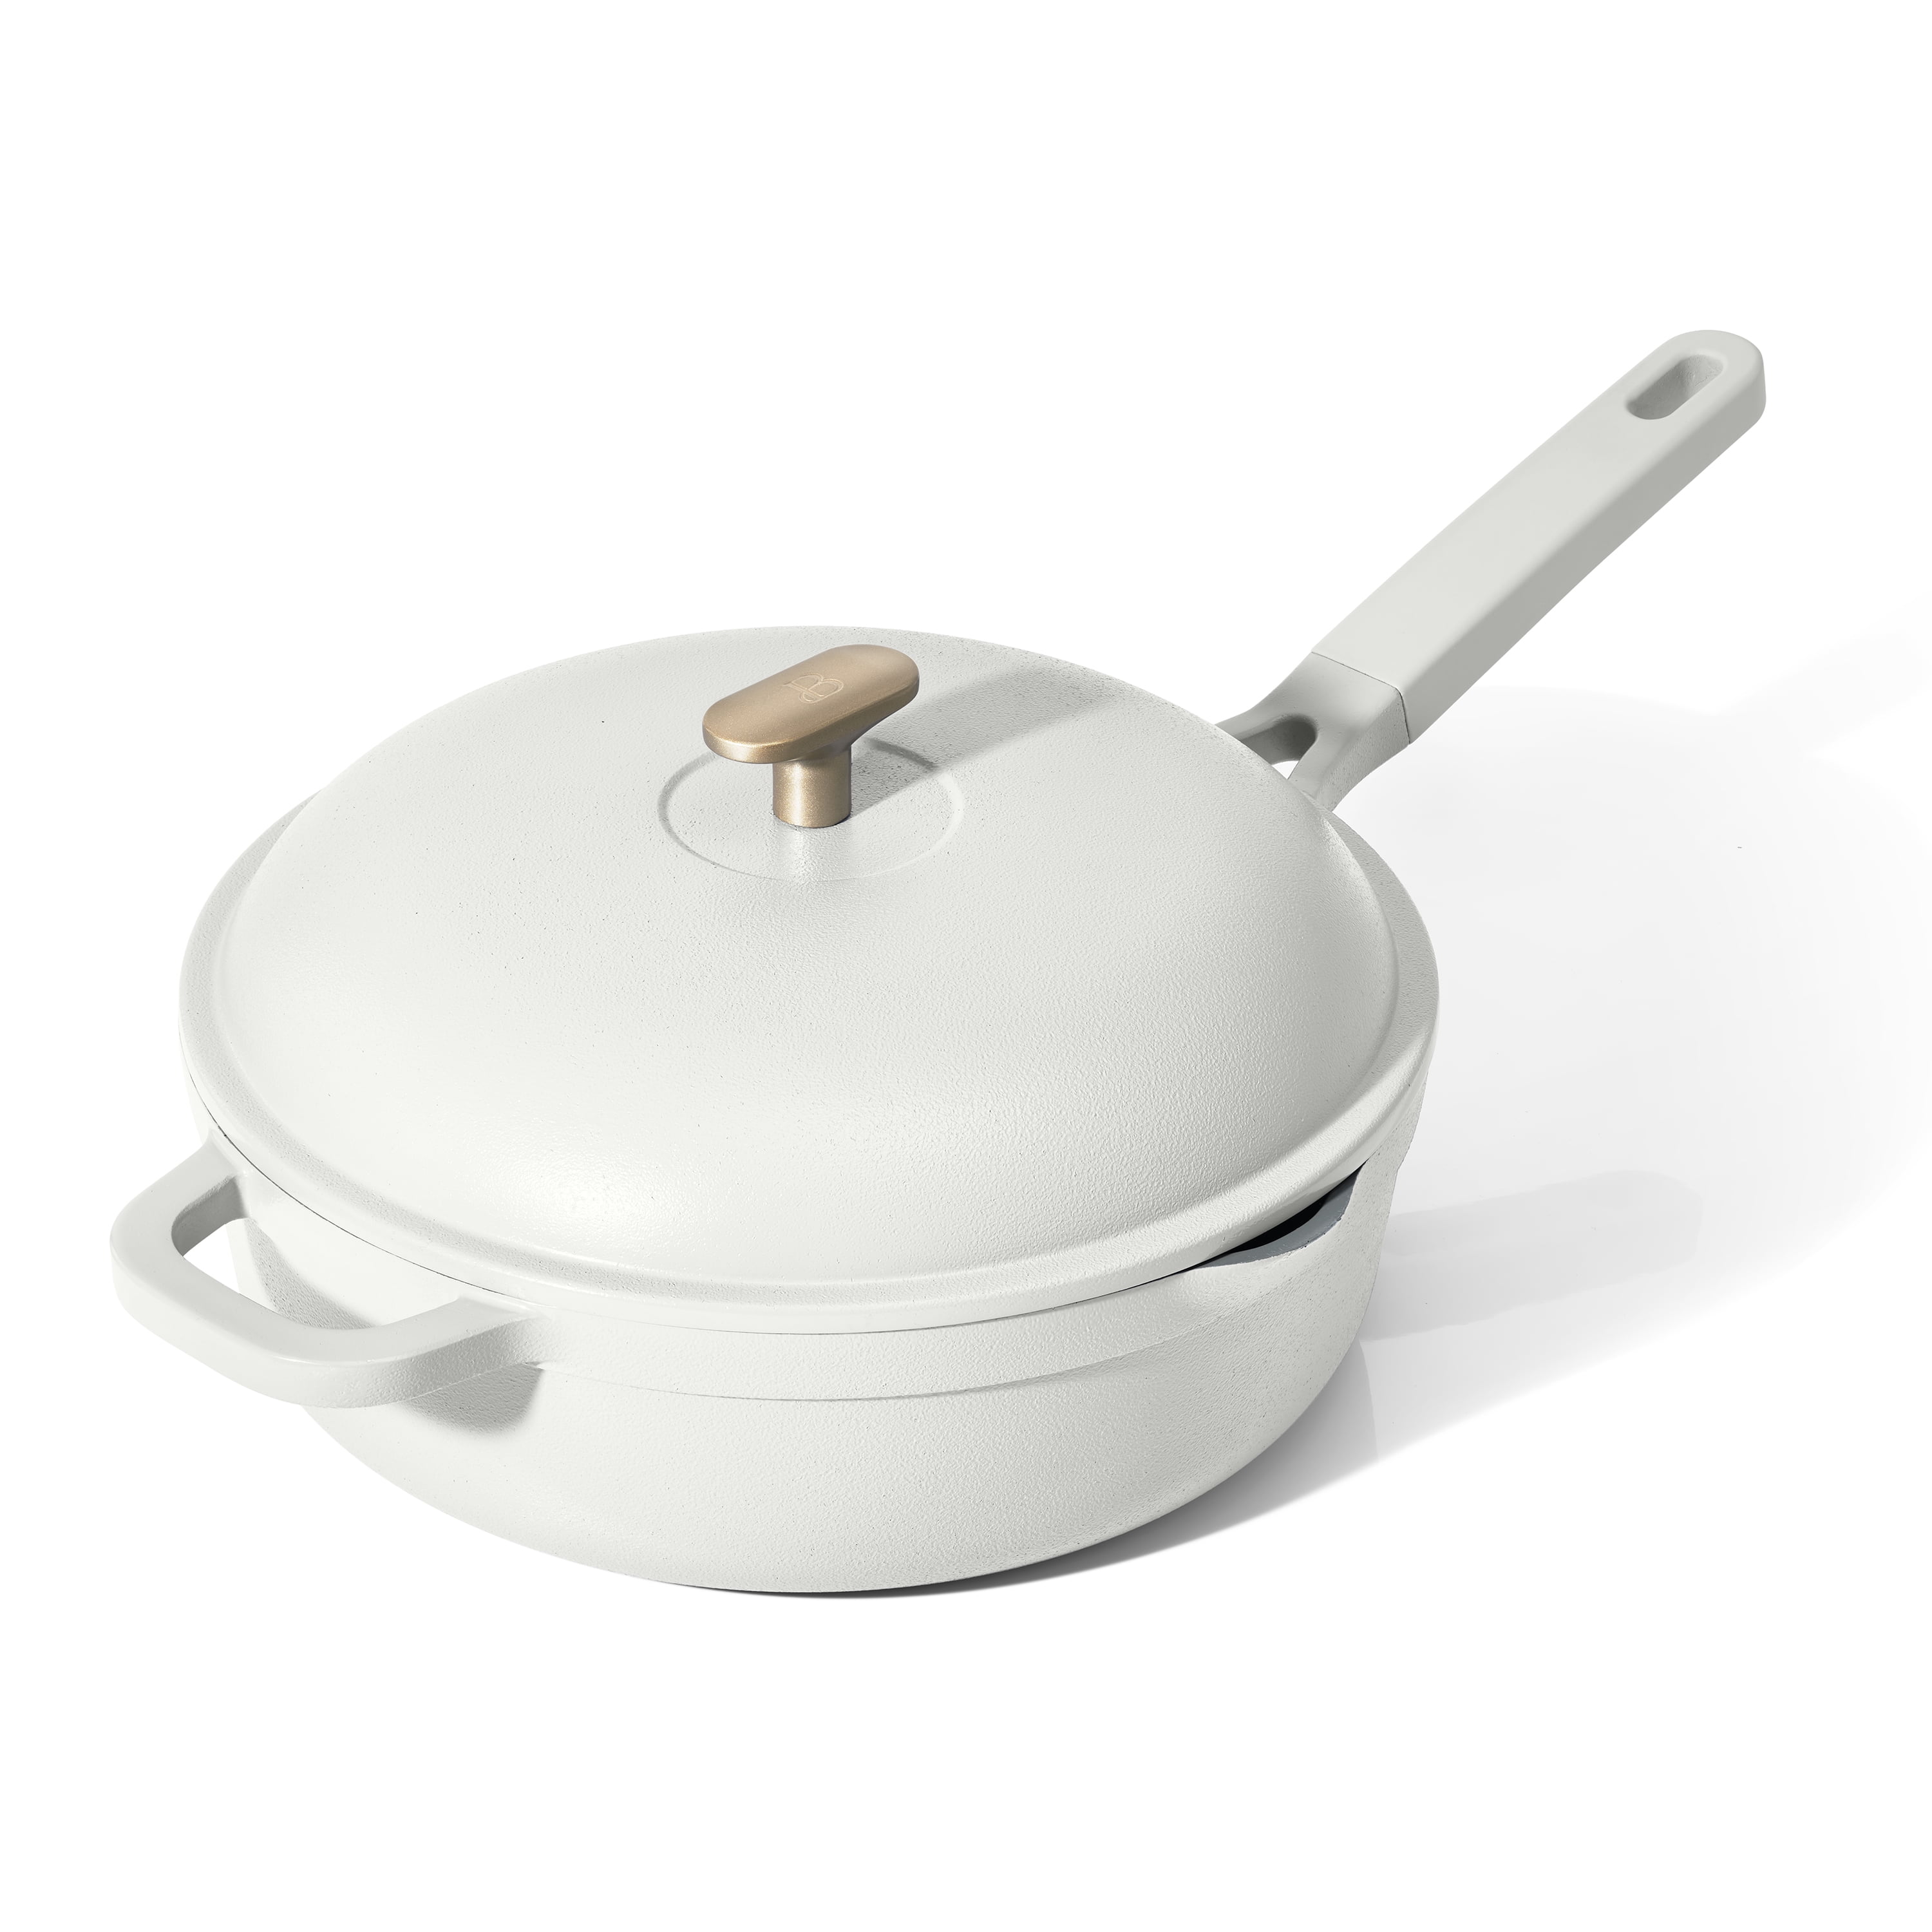 Beautiful All-in-One 4 QT Hero Pan with Steam Insert, 3 Pc Set, White Icing by Drew Barrymore - Walmart.com